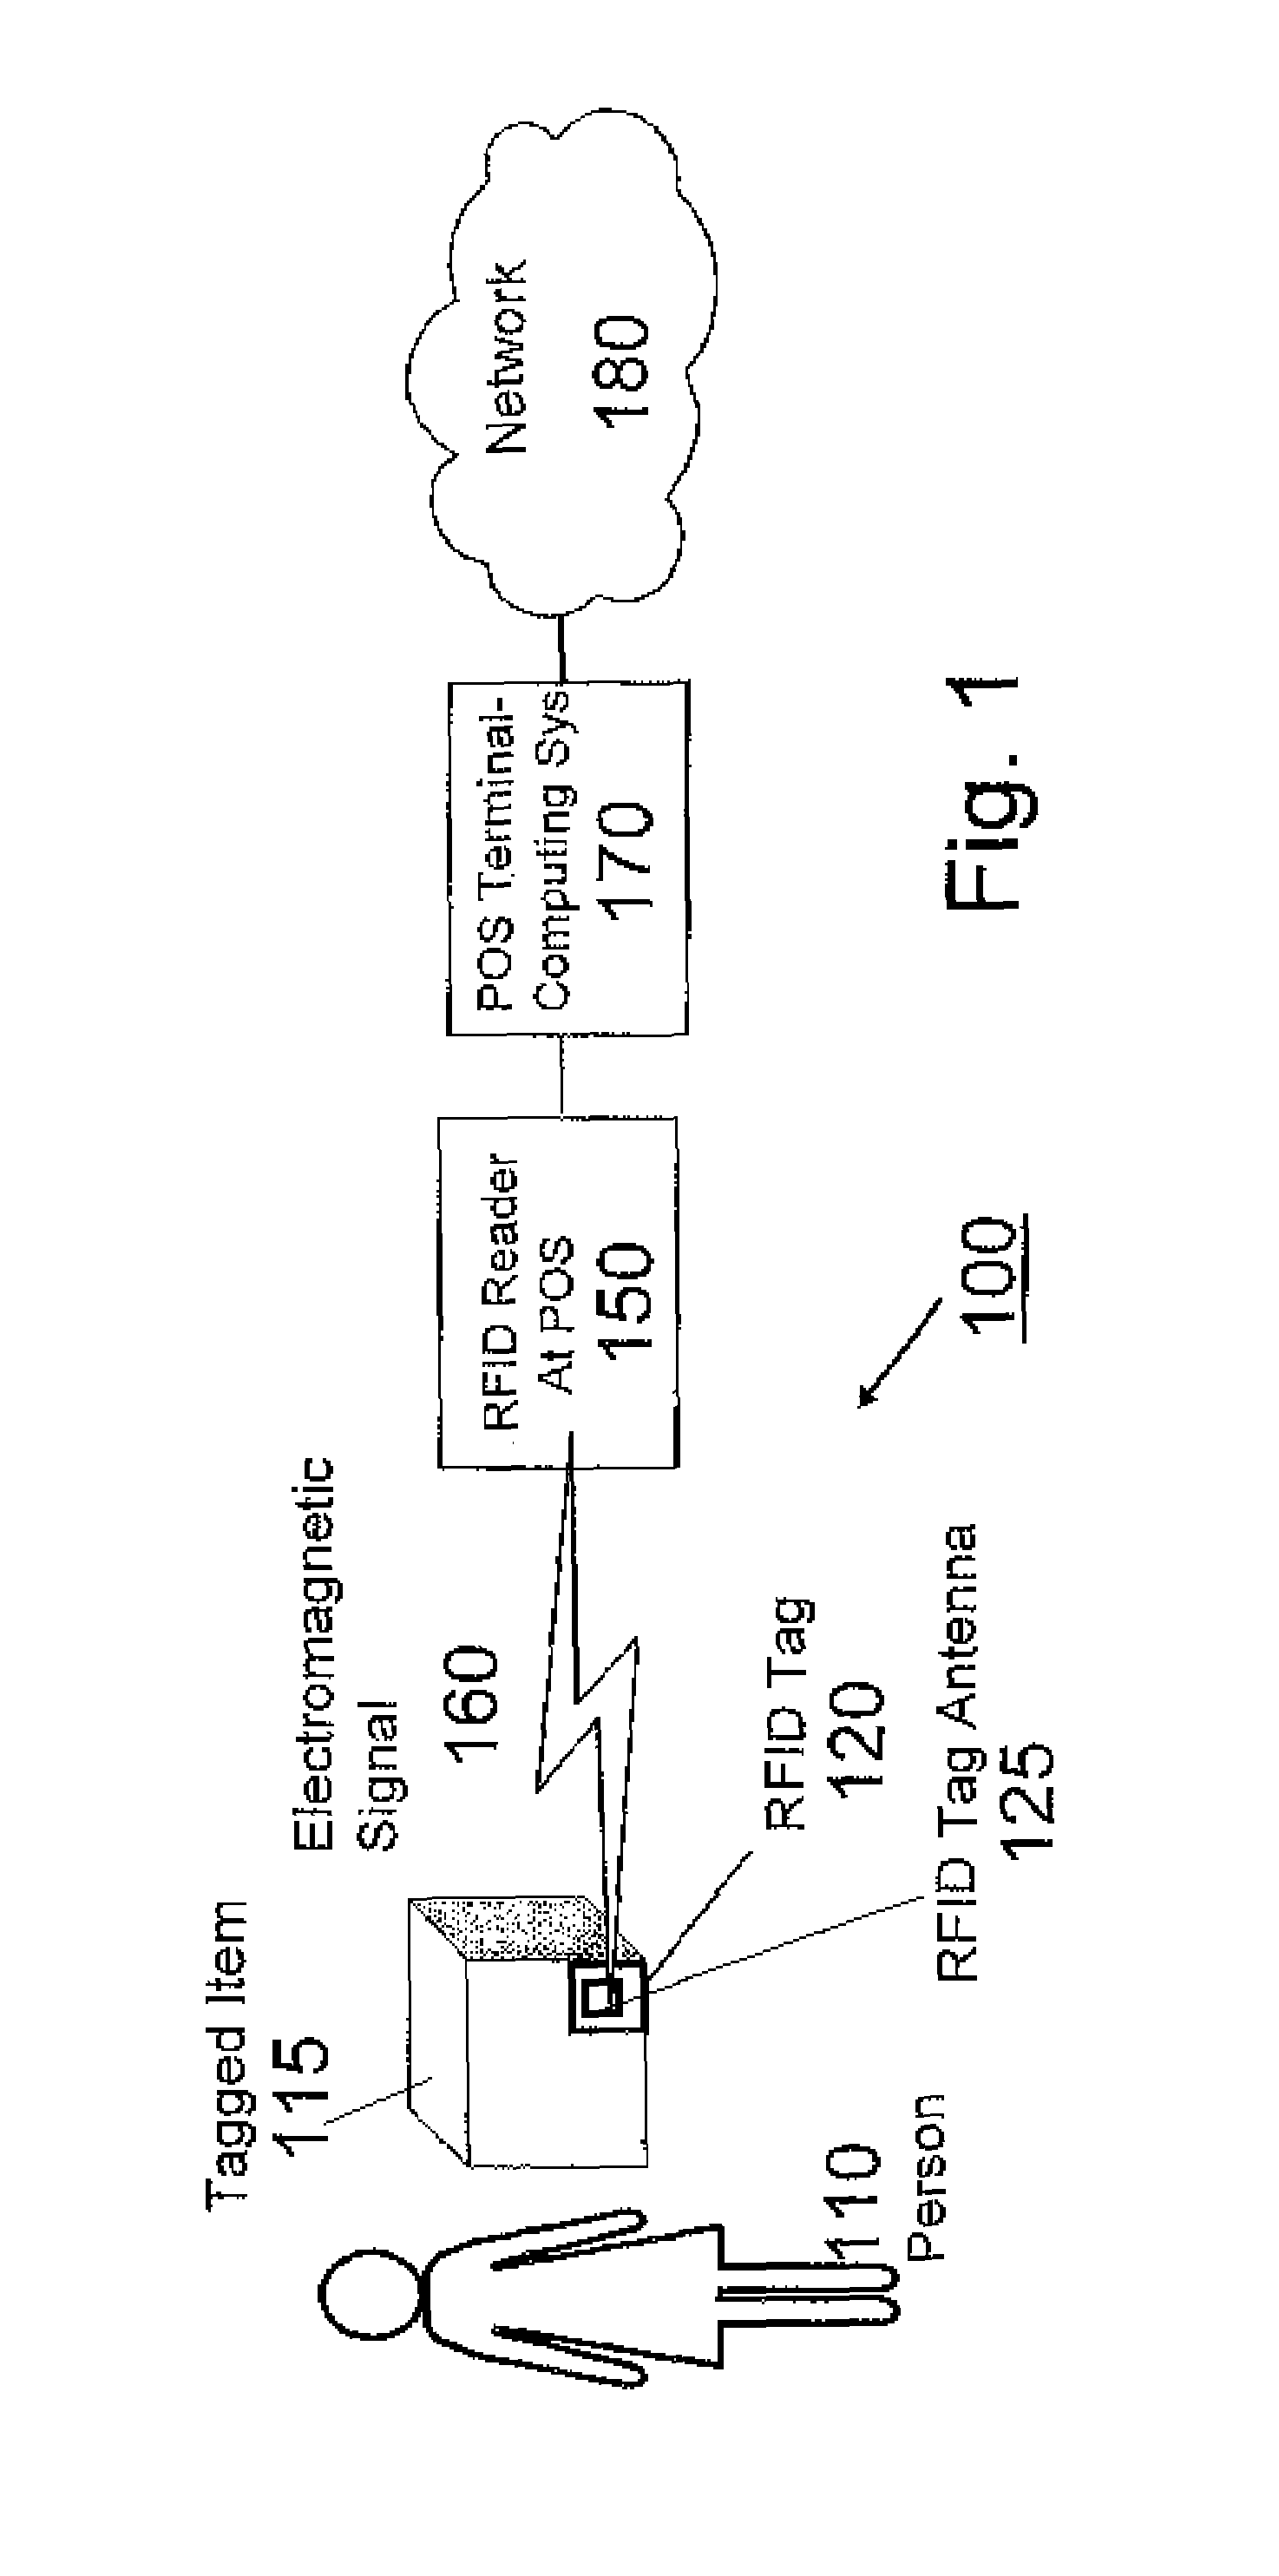 System and method for disabling RFID tags